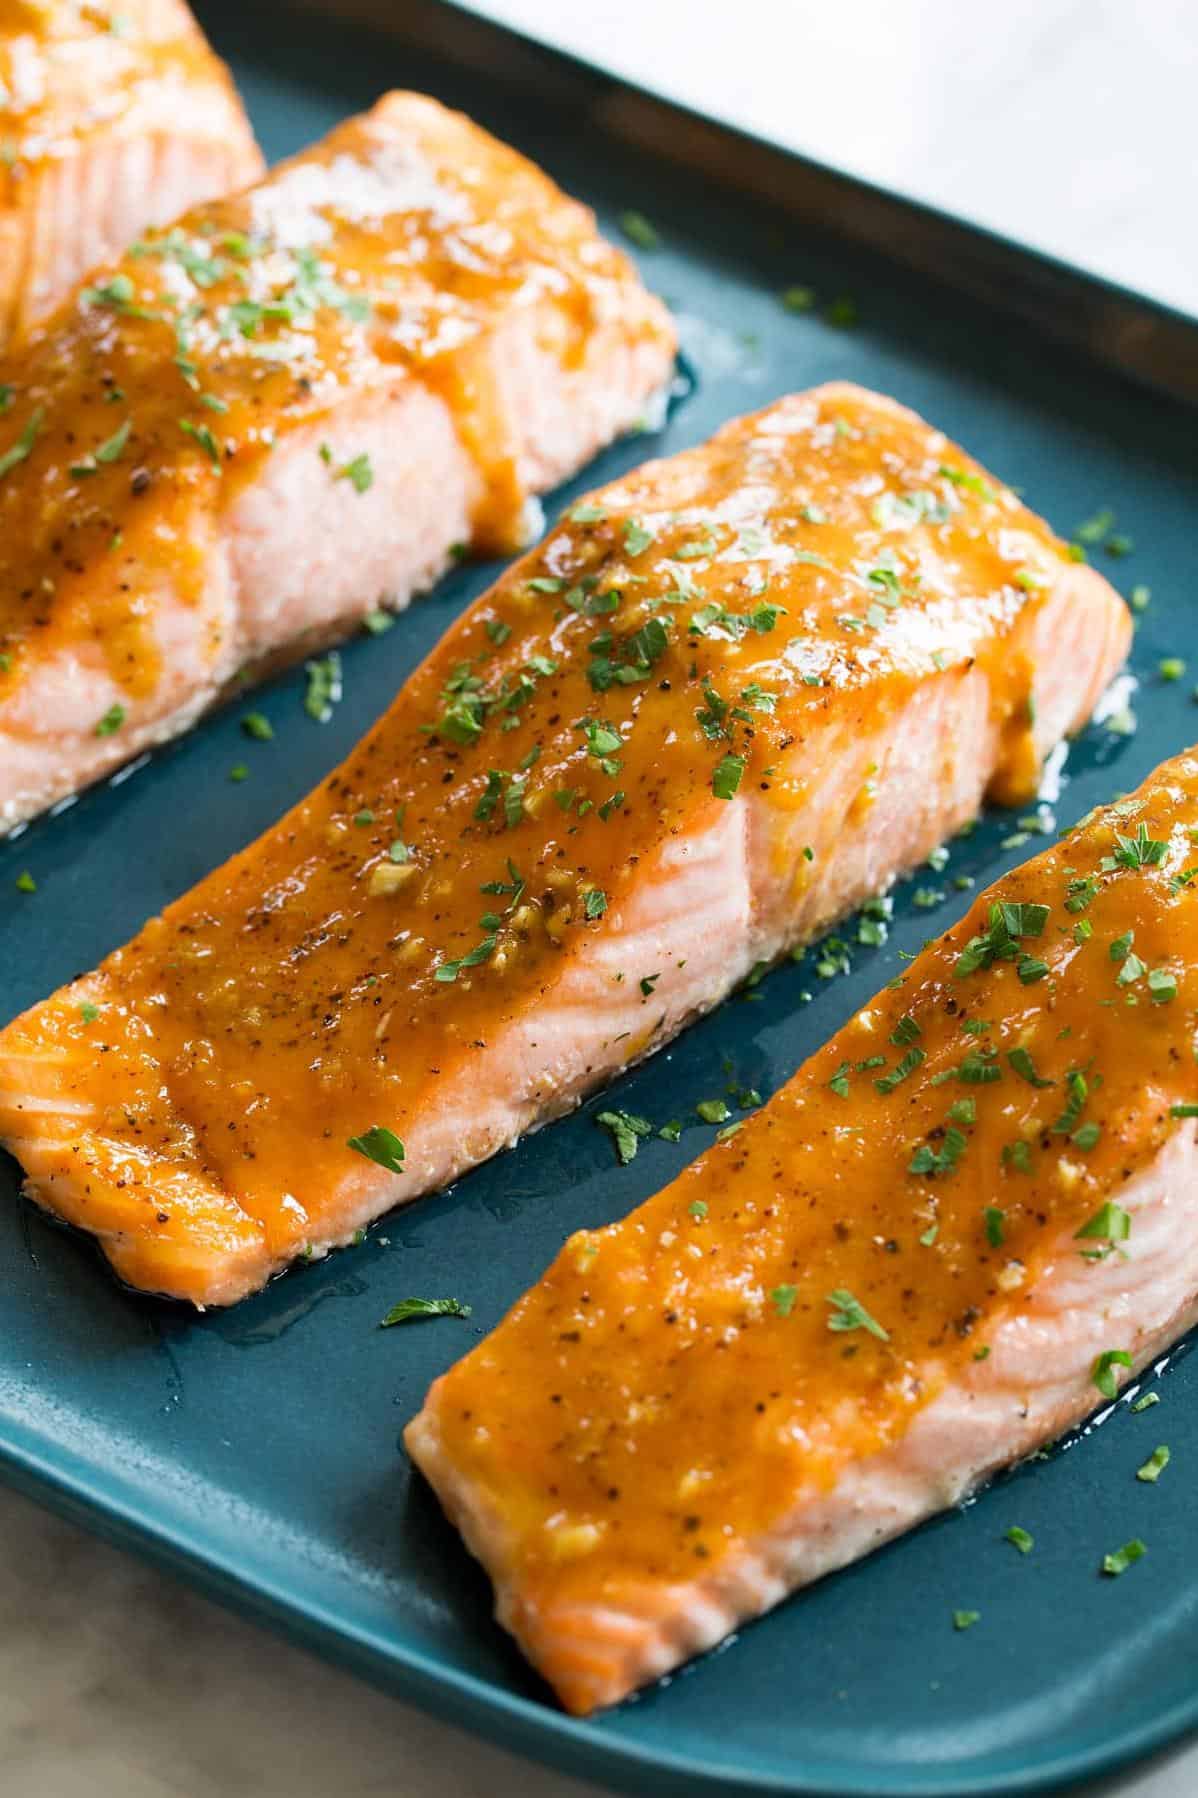  Glossy and appetizing: Salmon coated in mustard and brown sugar glaze